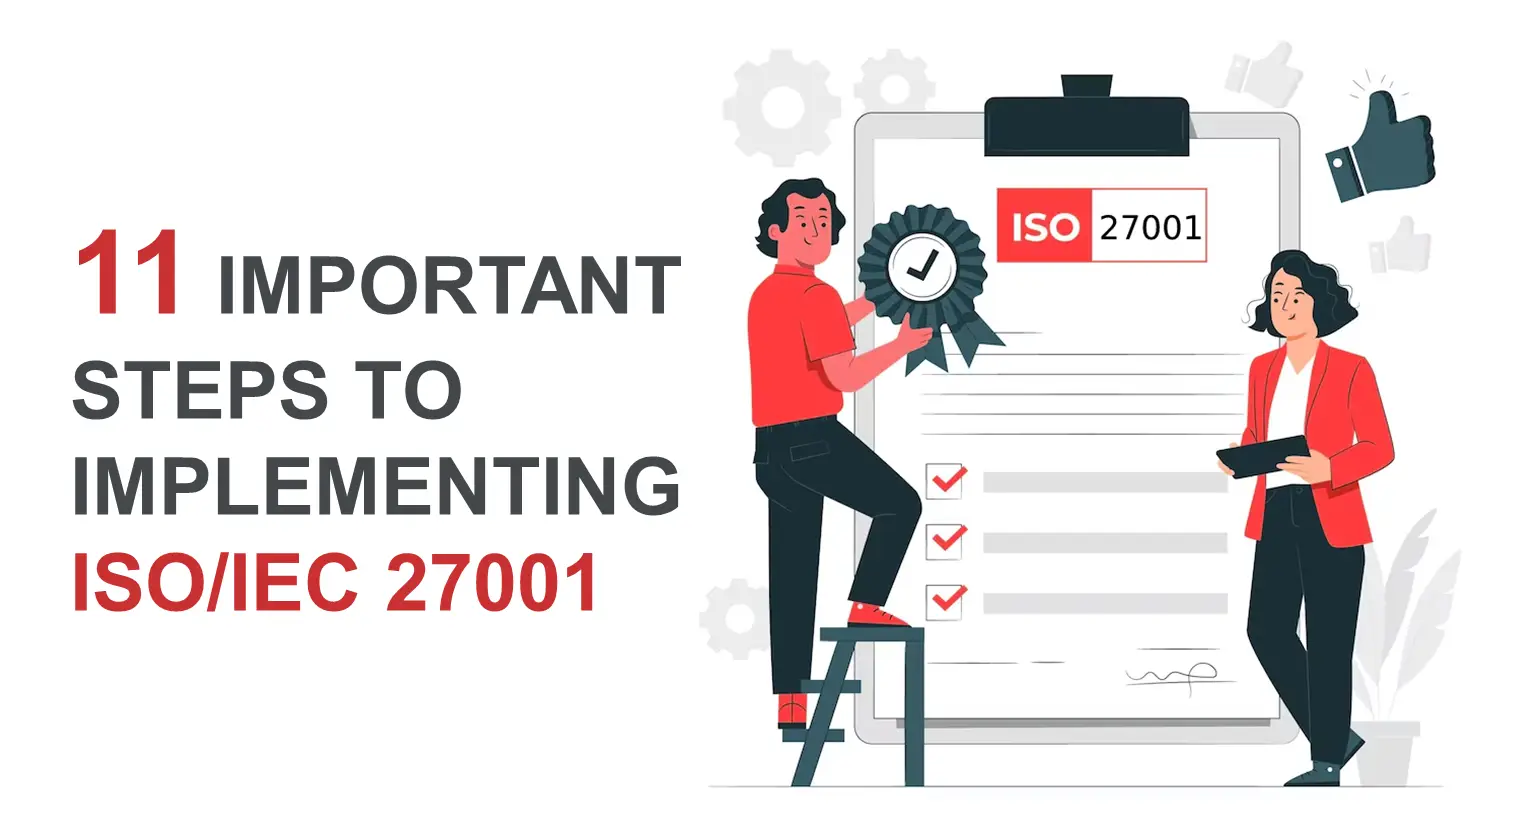 11 Important Steps to Implementing ISO/IEC 27001